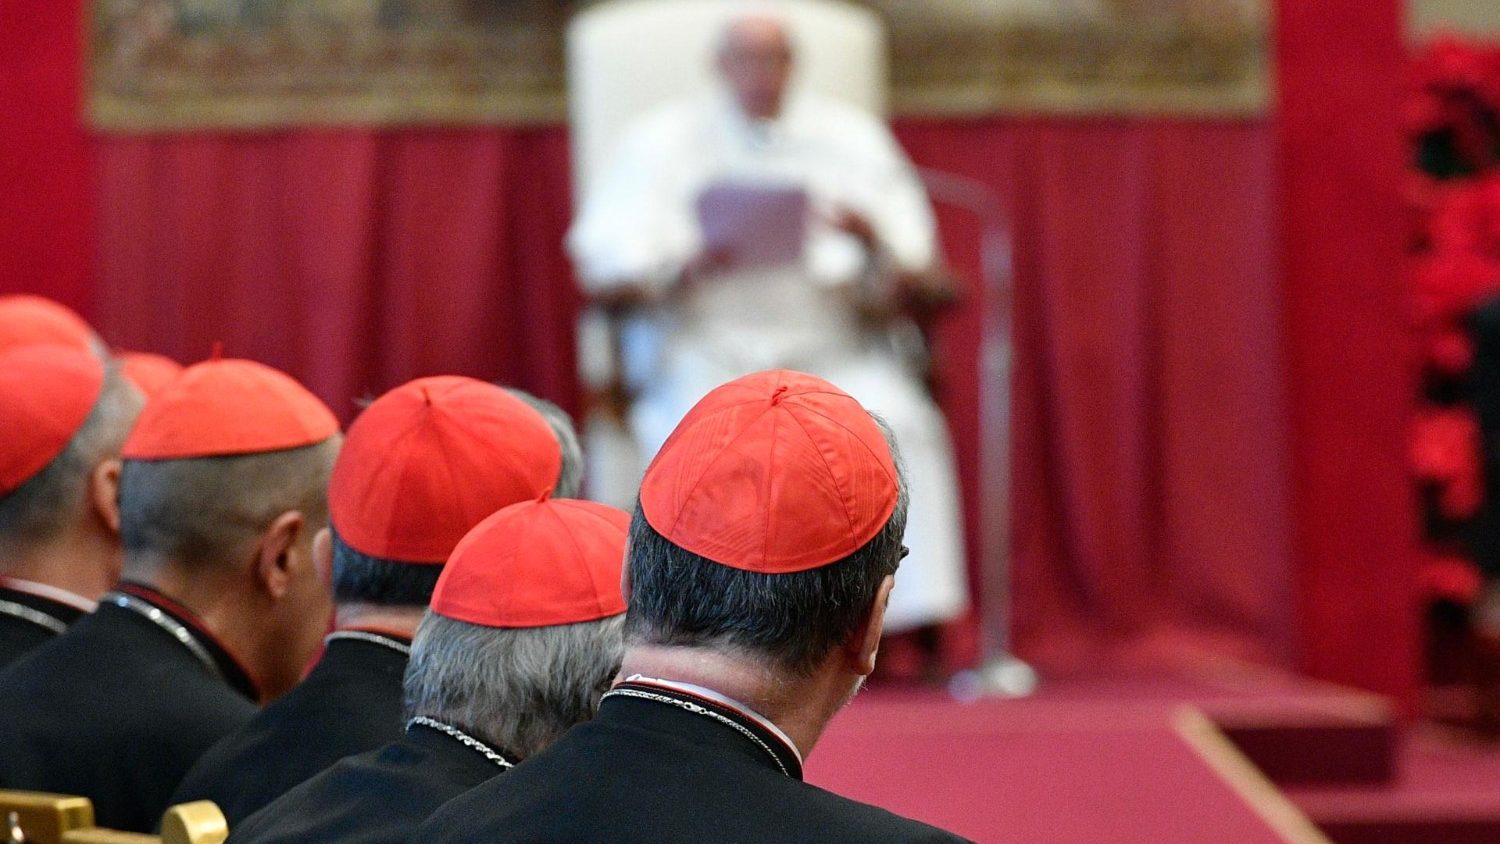 Pope to the Roman Curia: “Only those who love come forward”